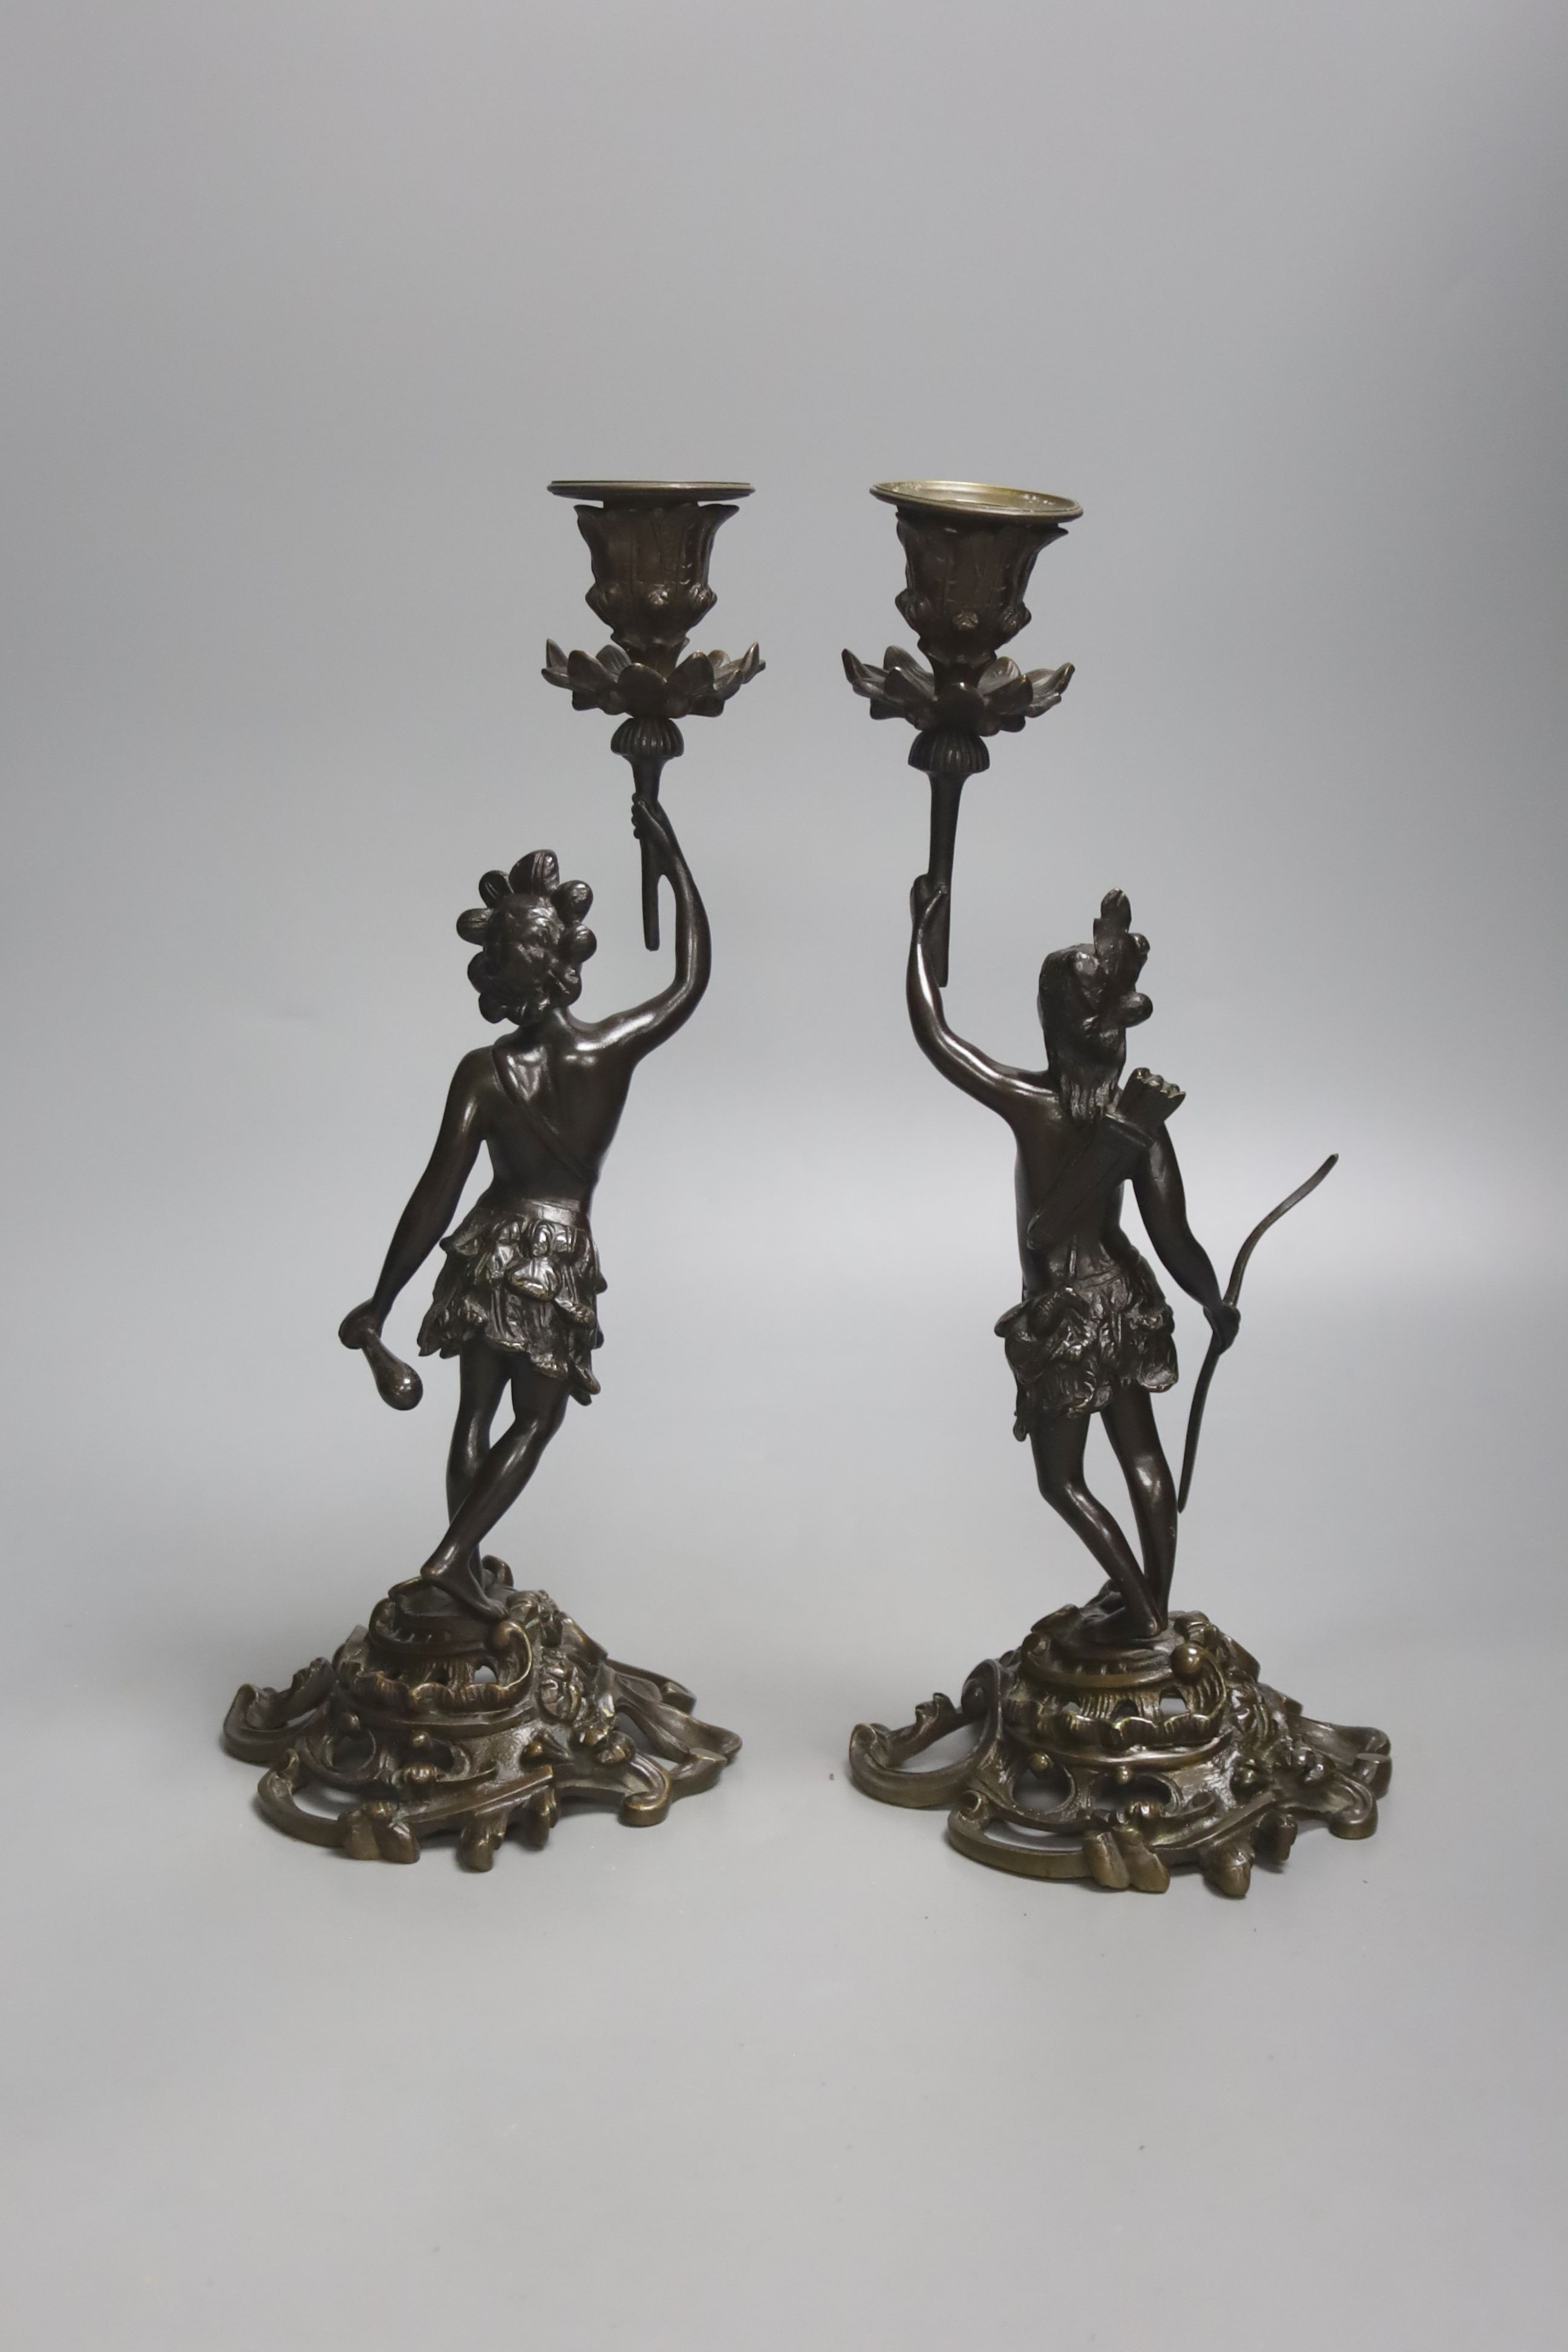 A pair of 19th century French bronze candlesticks, modelled as natives, height 32cm - Image 3 of 3